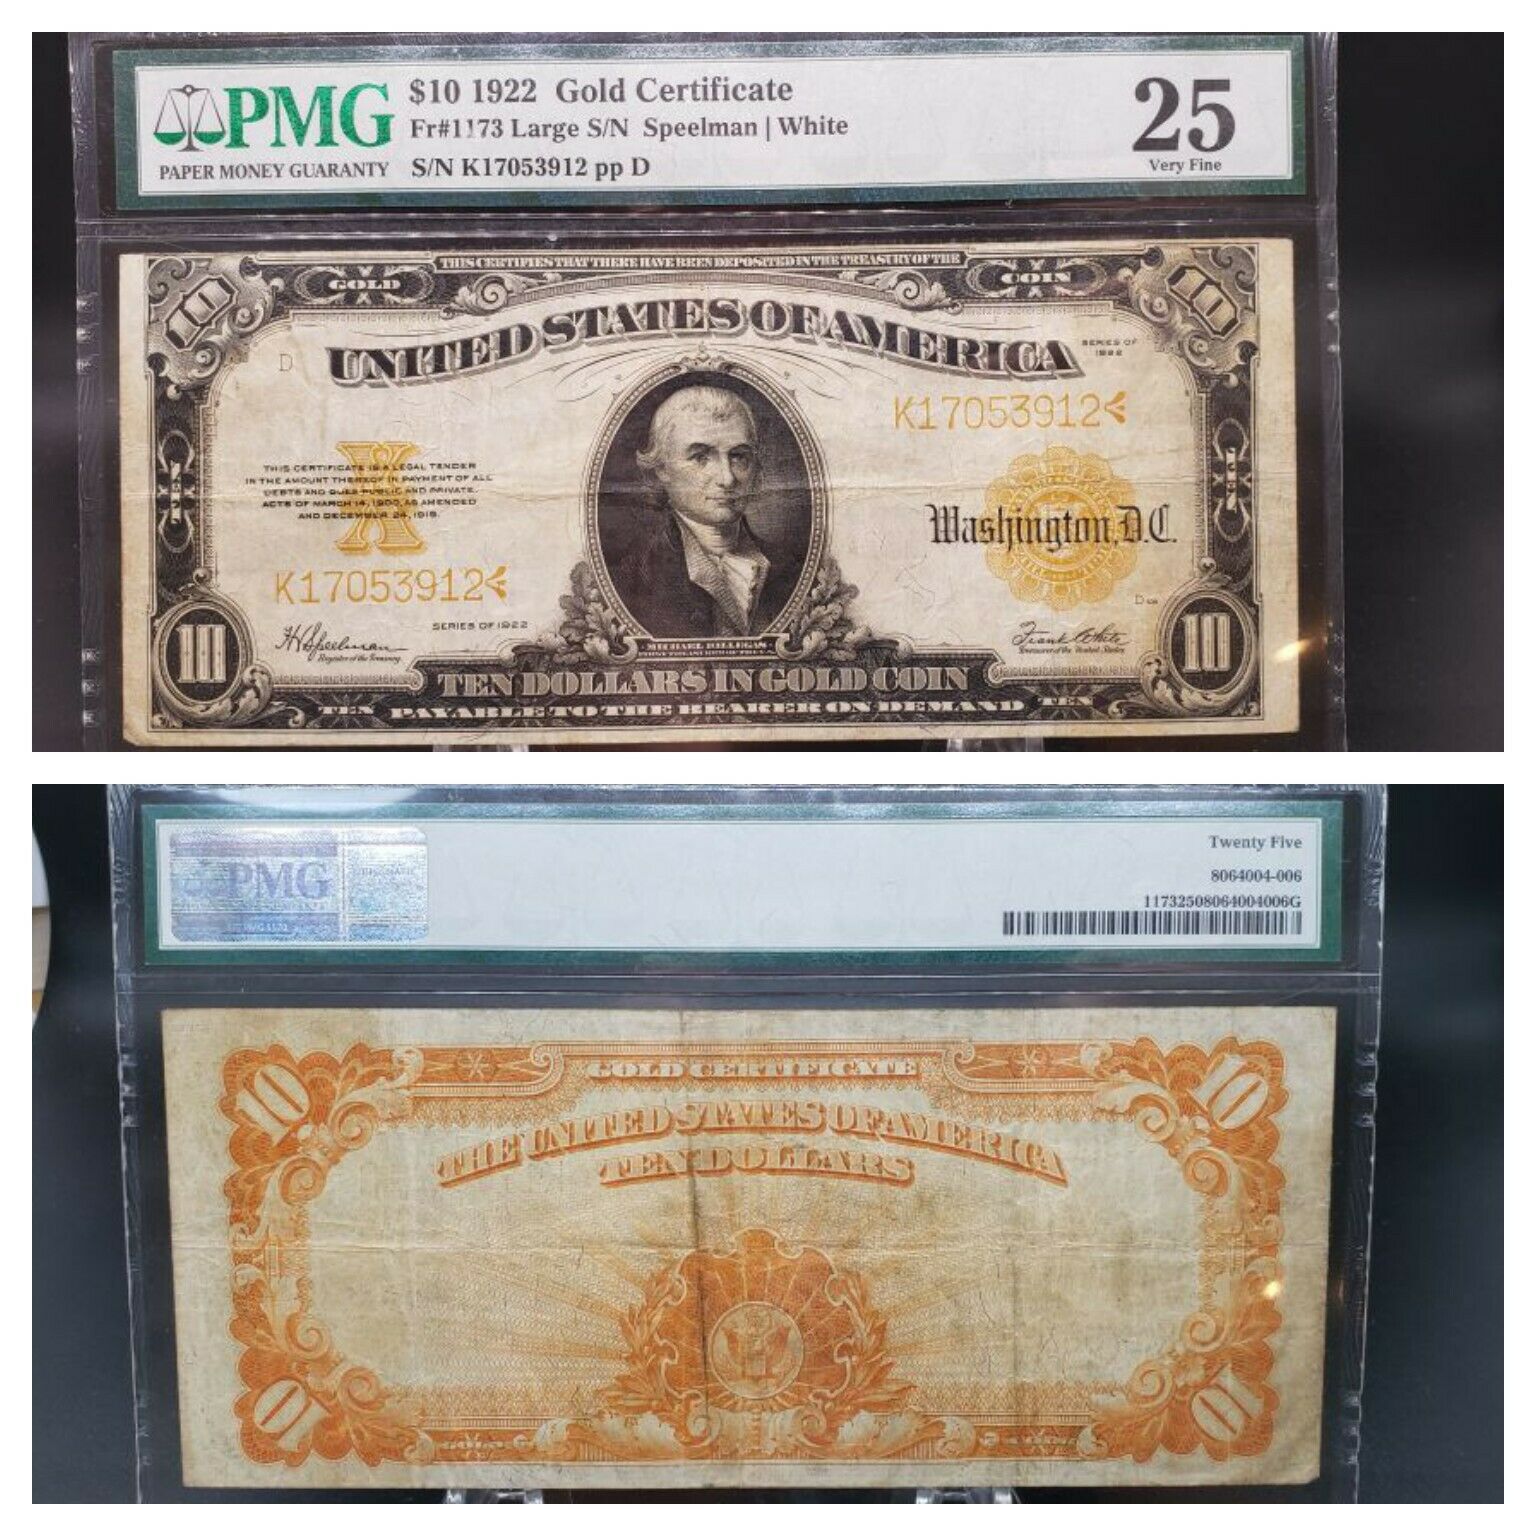 $10 1922 Gold Certificate FR#1173 PMG VF-25 Large Speelman/White KVE Investments